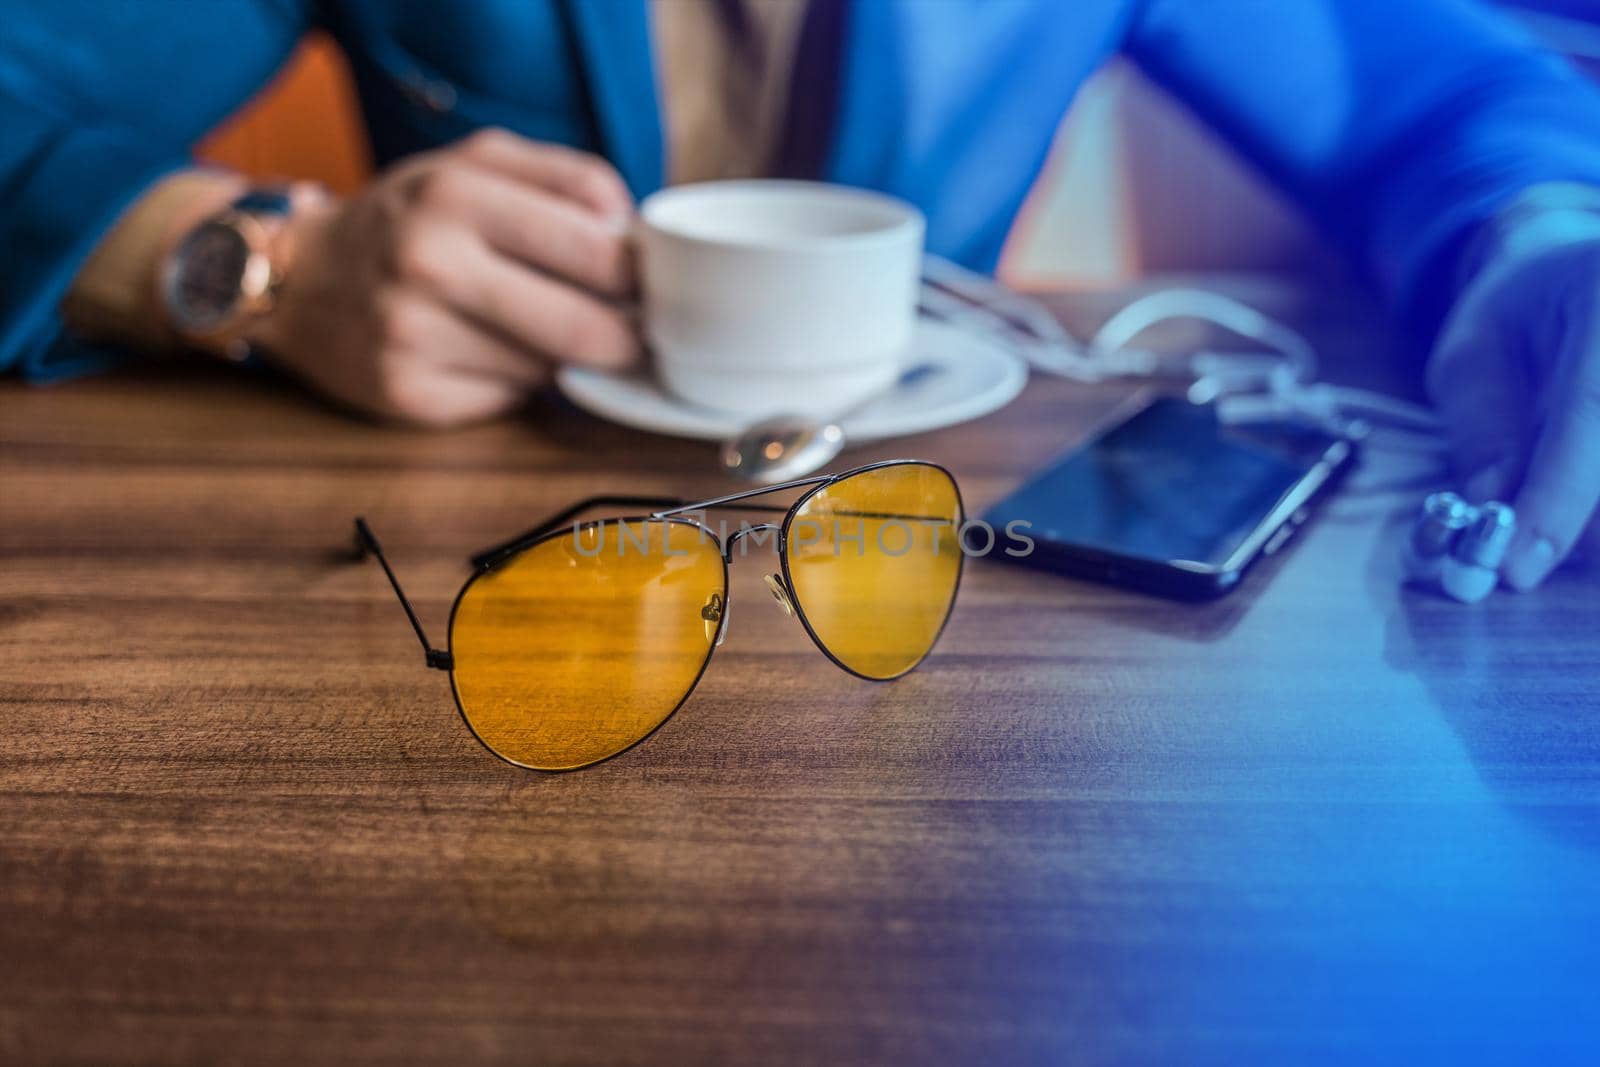 Sunglasses, mobile phone or smartphone and a mug of coffee on the table in a cafe with the hand of a businessman.